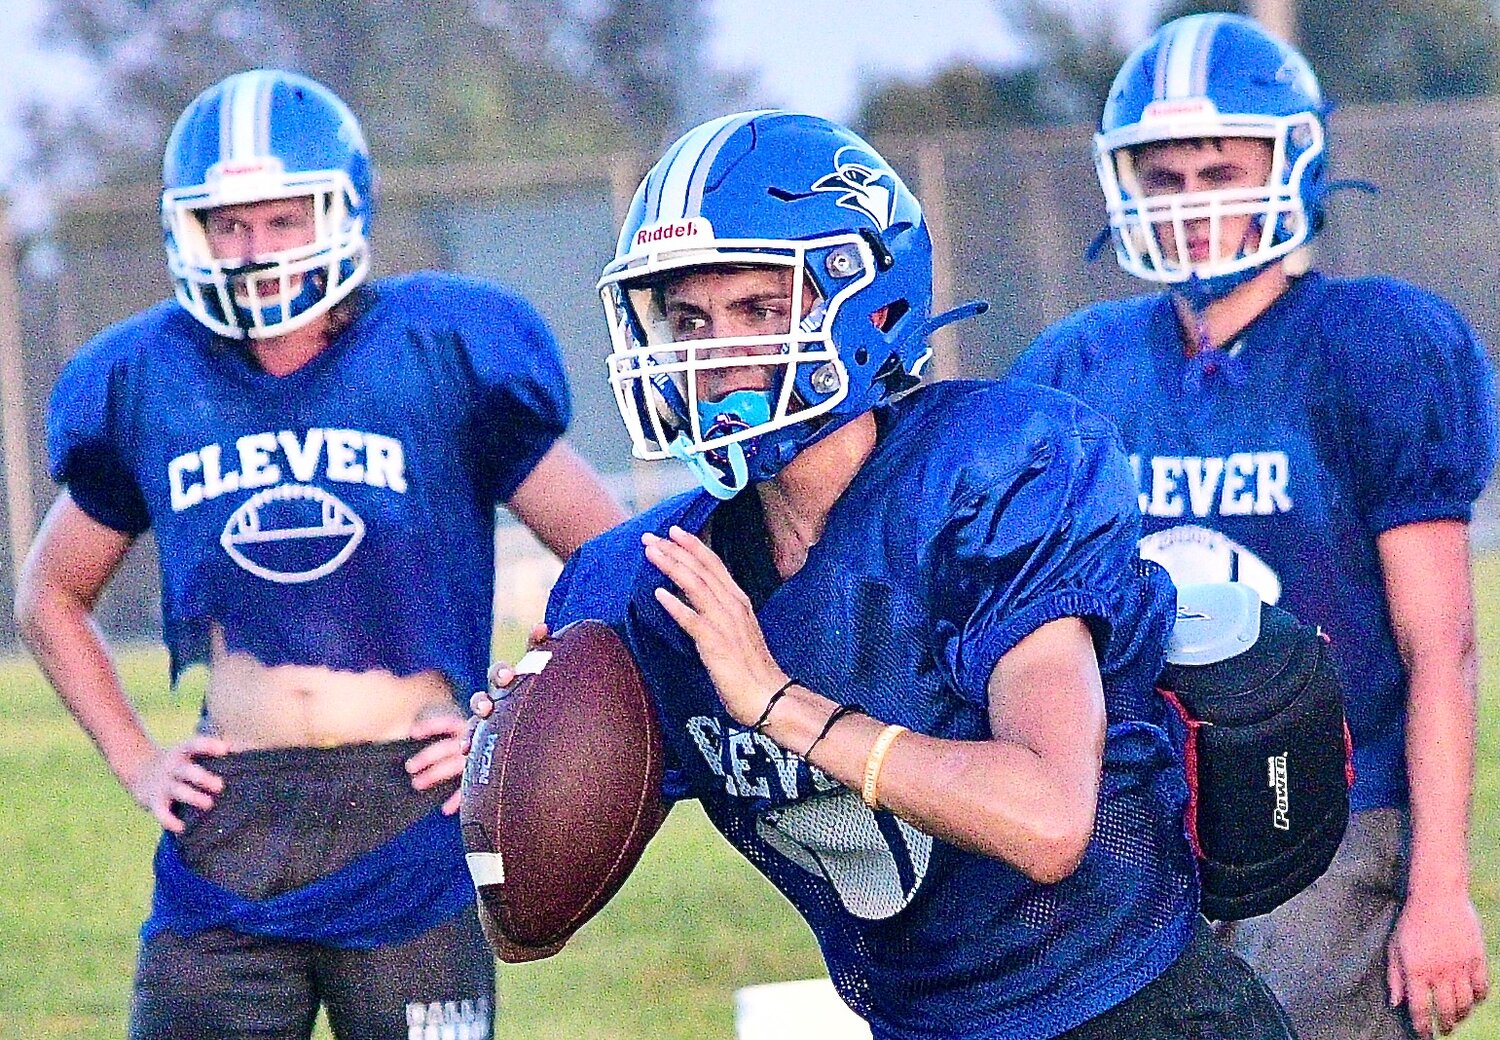 CLEVER'S GAGE EVANS gets set to throw downfield as teammates Blake Steele and Austin Scott watch.